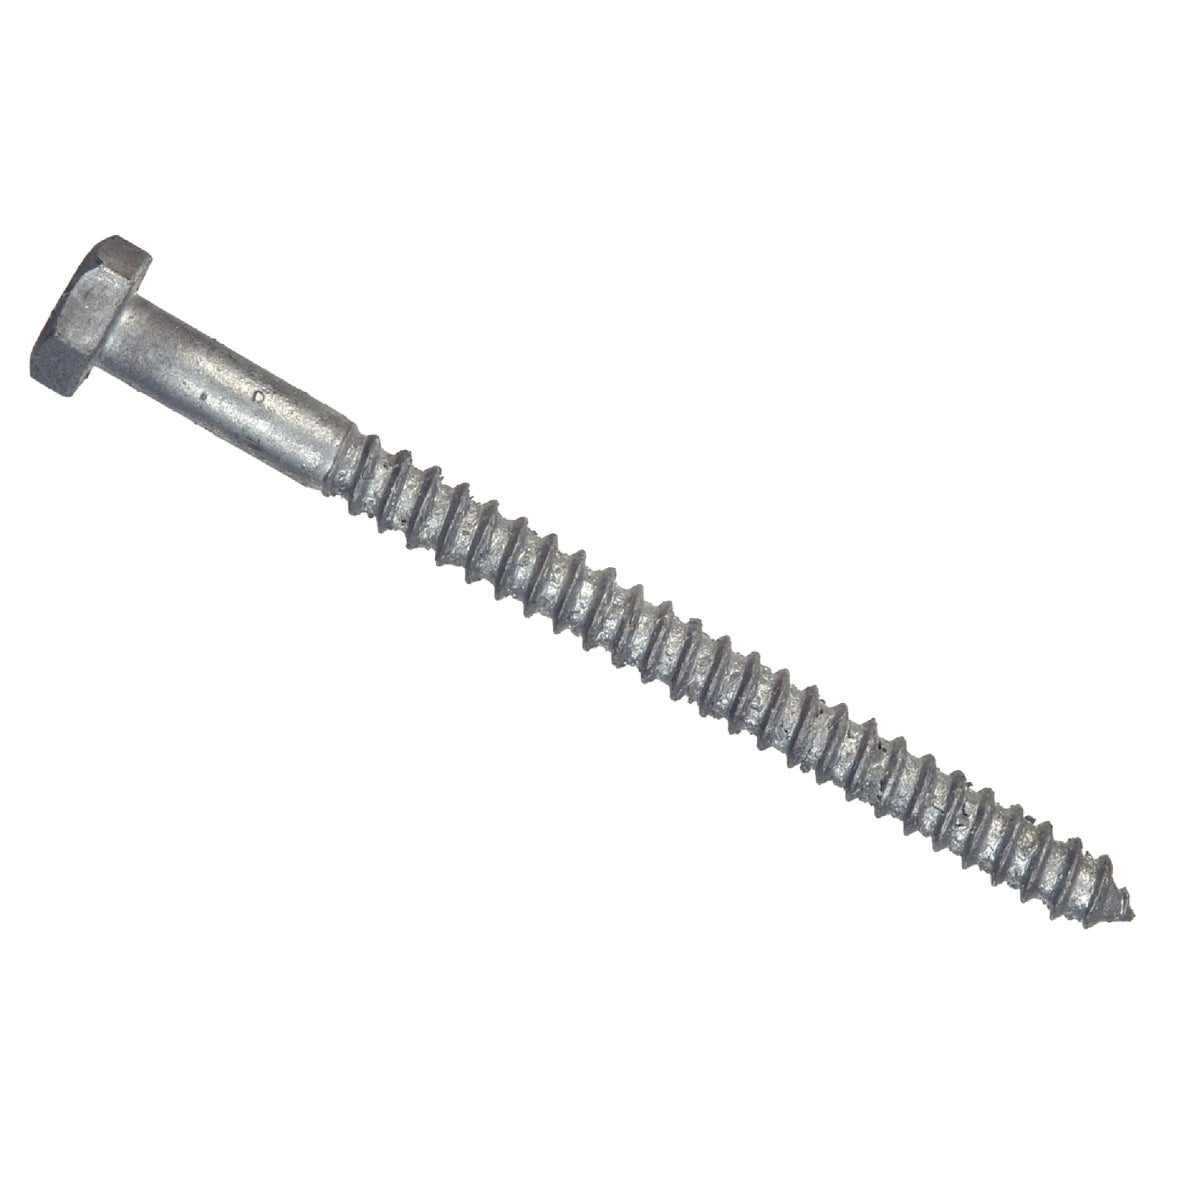 Item 723894, Hot galvanized lag screw with hex head and gimlet point.